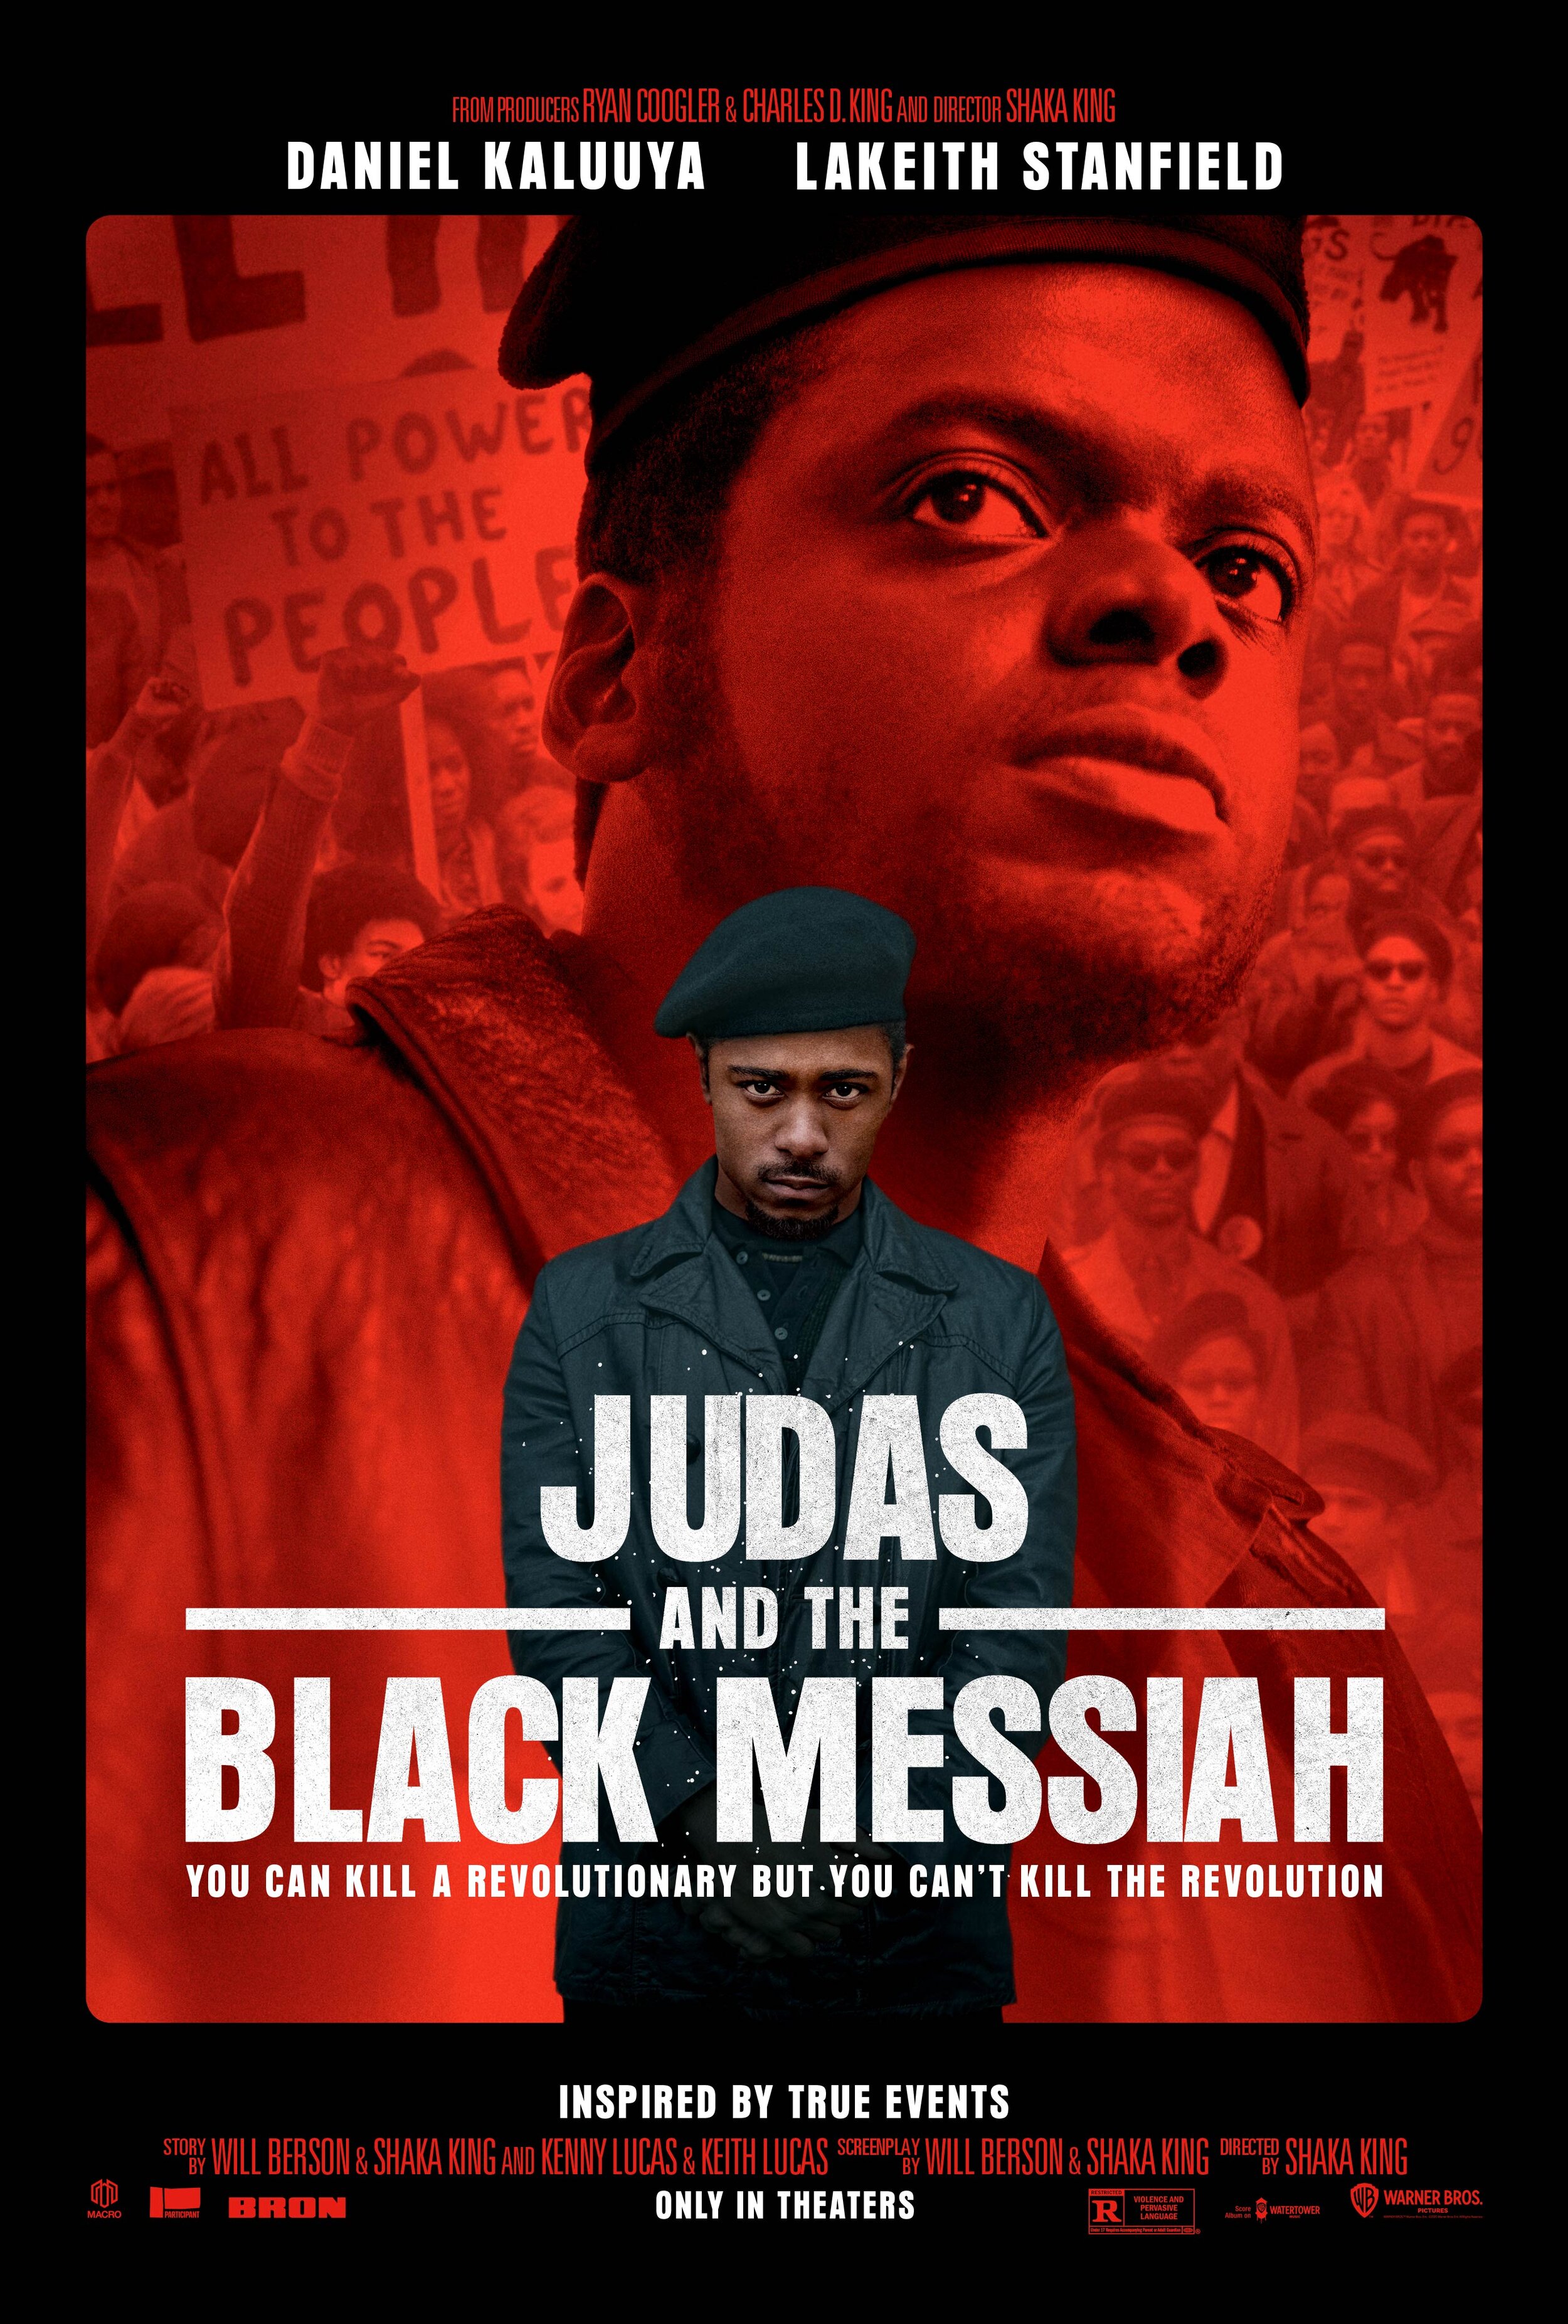 Promotional poster for JUDAS AND THE BLACK MESSIAH